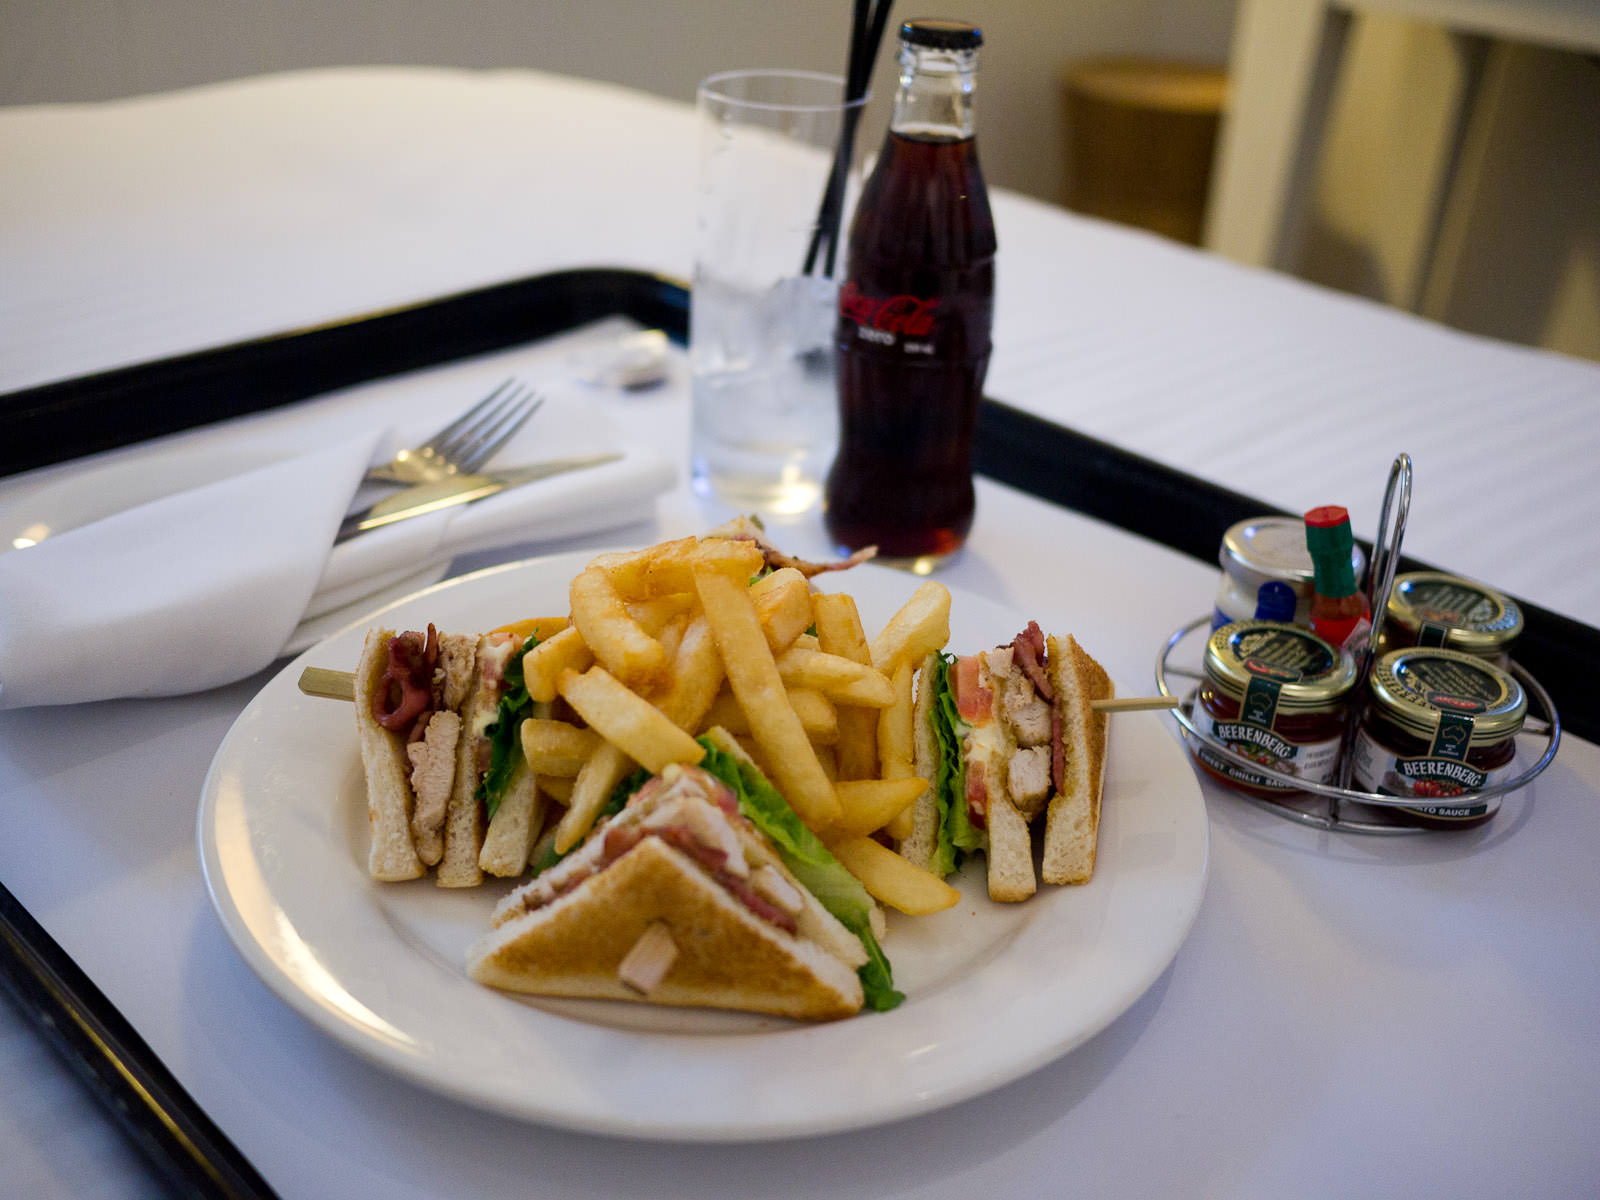 Room Service at The Sebel Pier One (Front Restaurant)  - club sandwich and Coke Zero